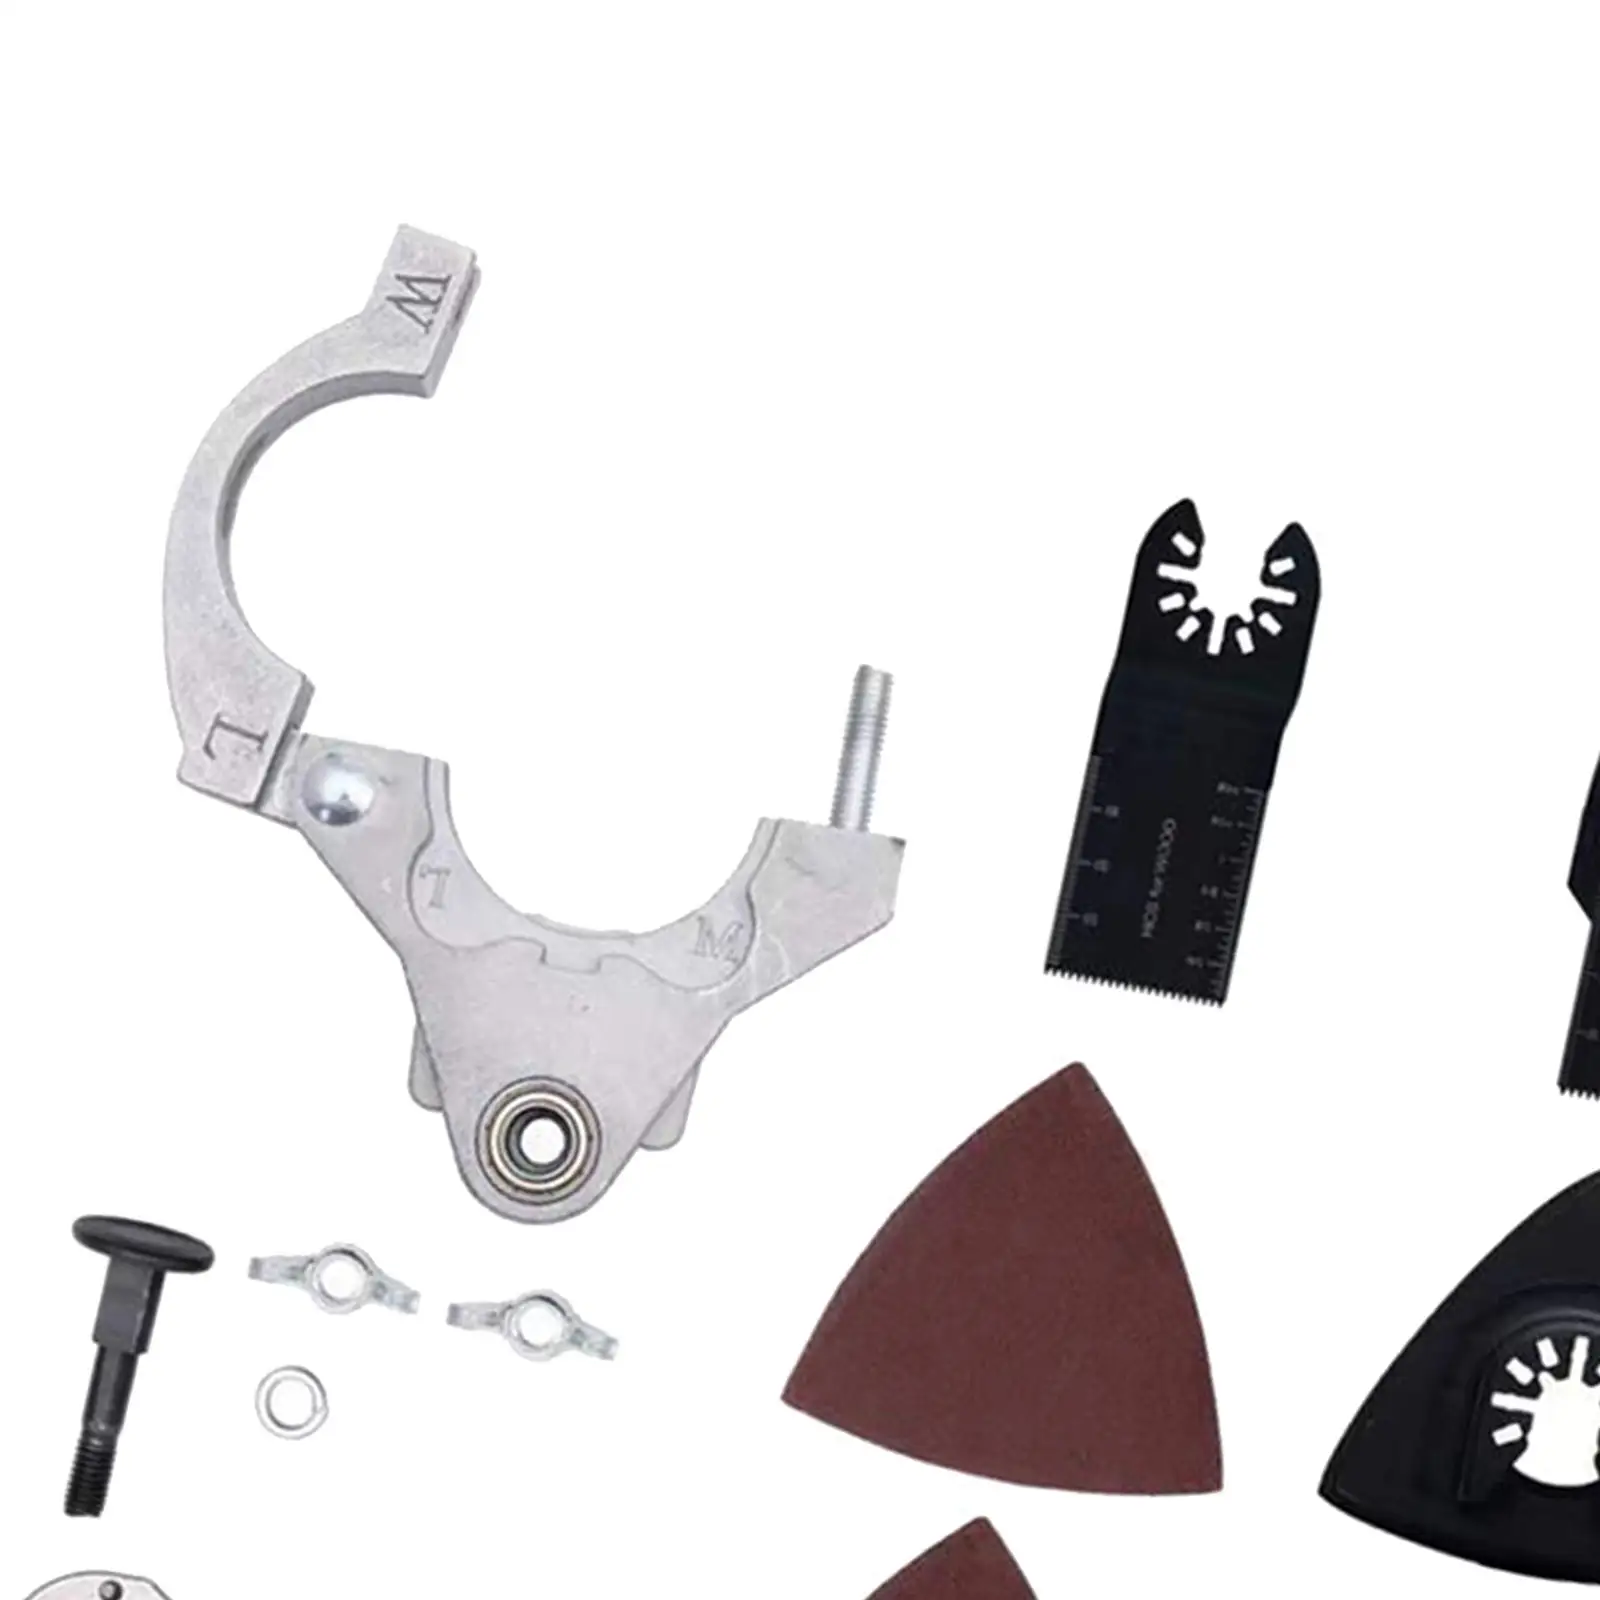 Angle Grinder Conversion Head Kits Practical for Cutting Tile Polishing